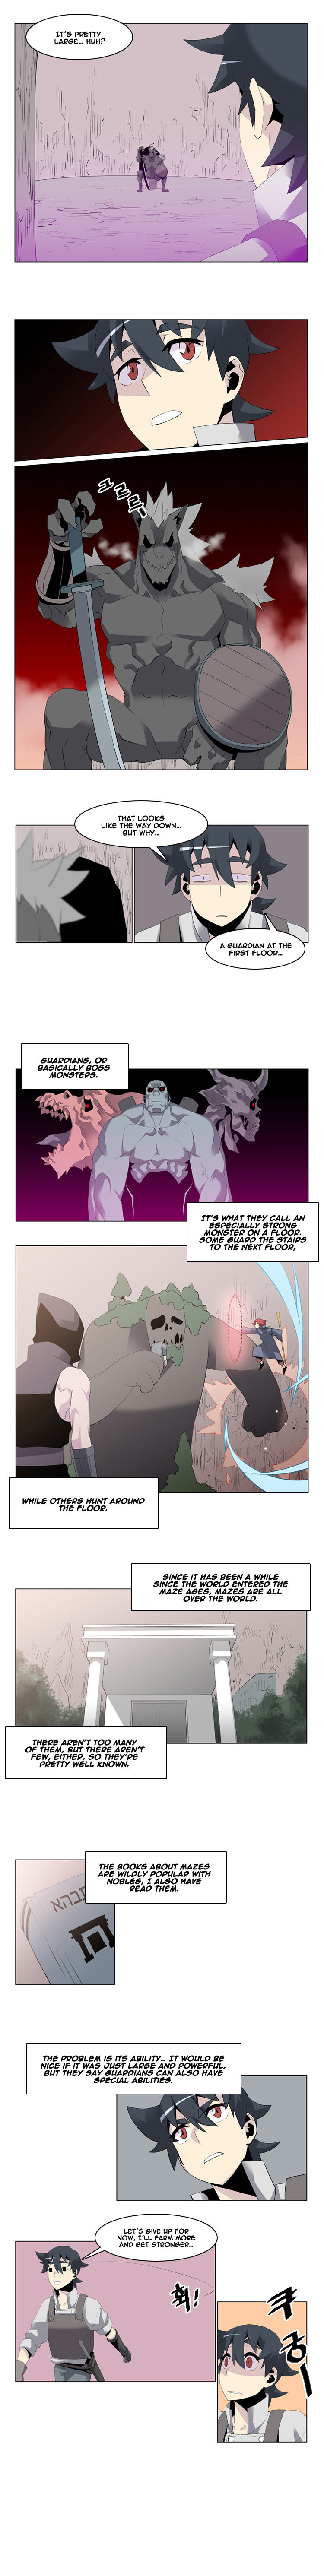 Maze Age Z Chapter 8 Page 2